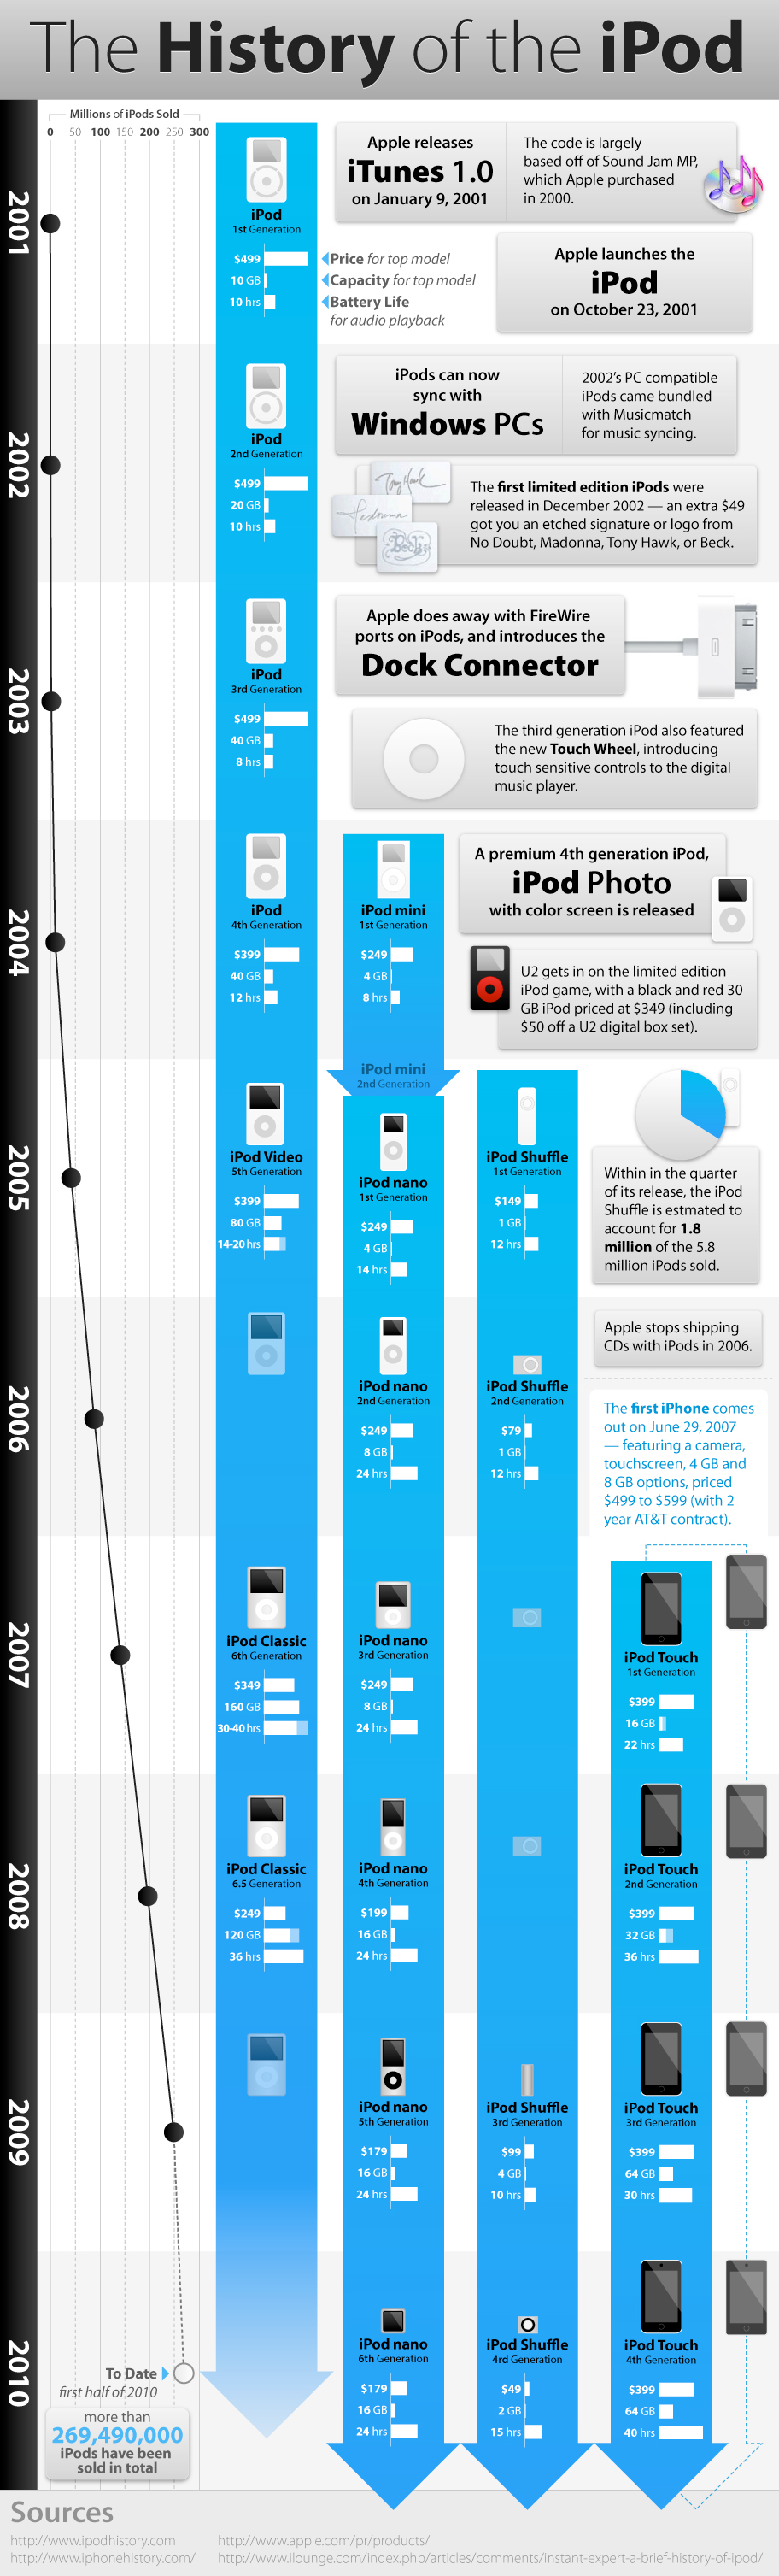 The History of the iPod [InfoGraphic]